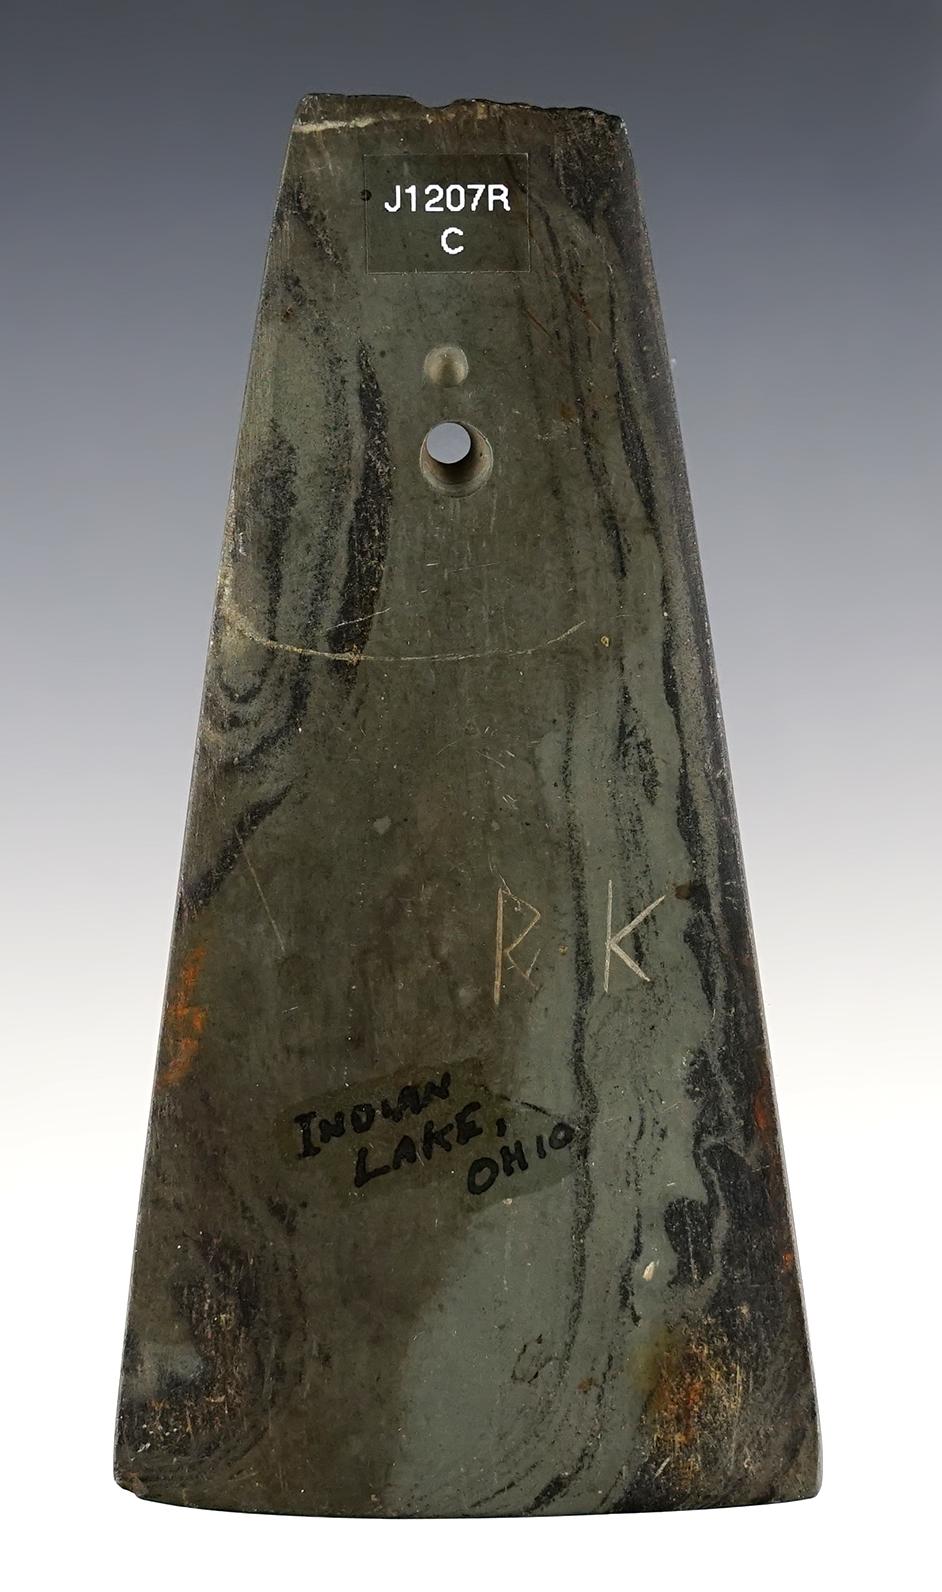 4 3/16" Hopewell Trapezoidal Pendant. The finder scratched their initials on the surface. Ohio.